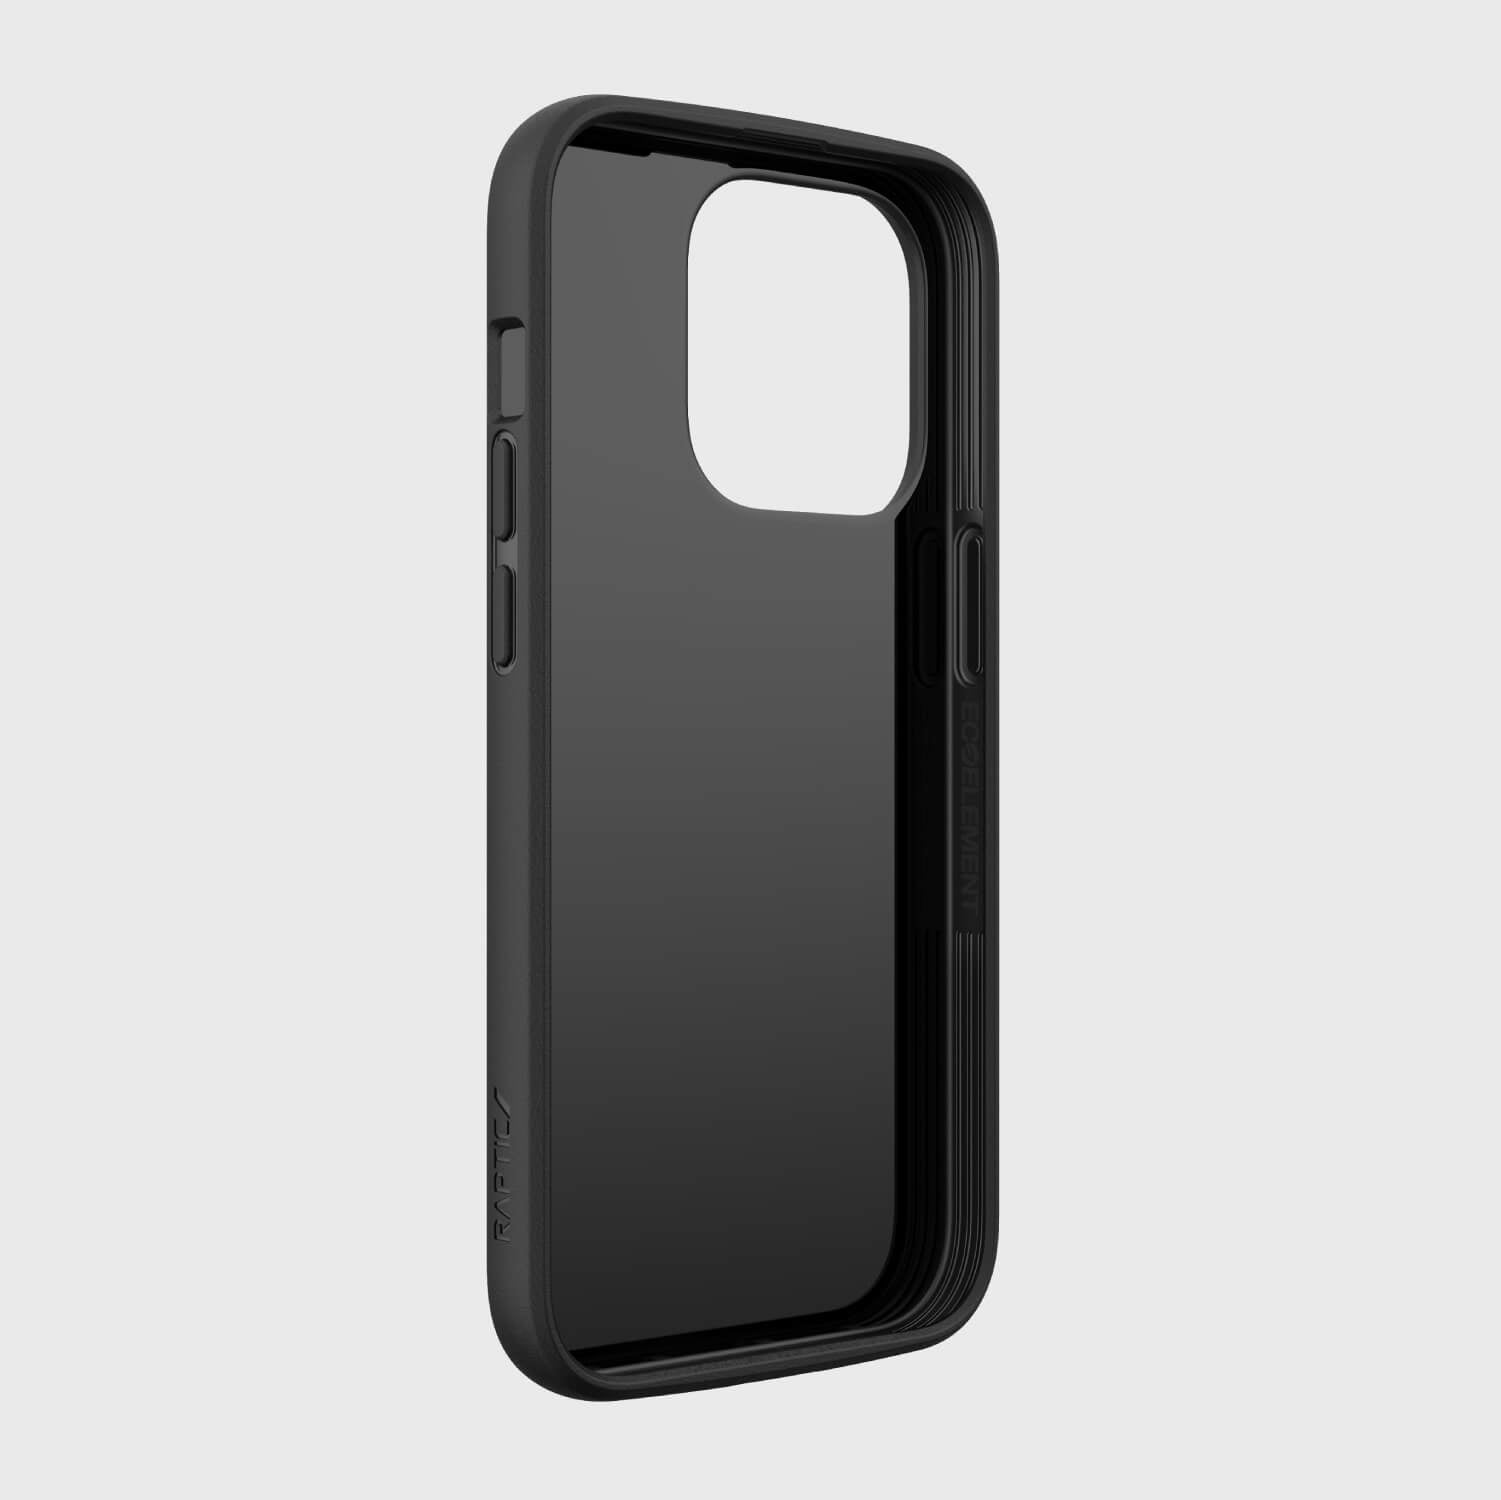 Raptic iPhone 14 Pro case in black offers texturing depth and is slim, making it the ideal recyclable case.